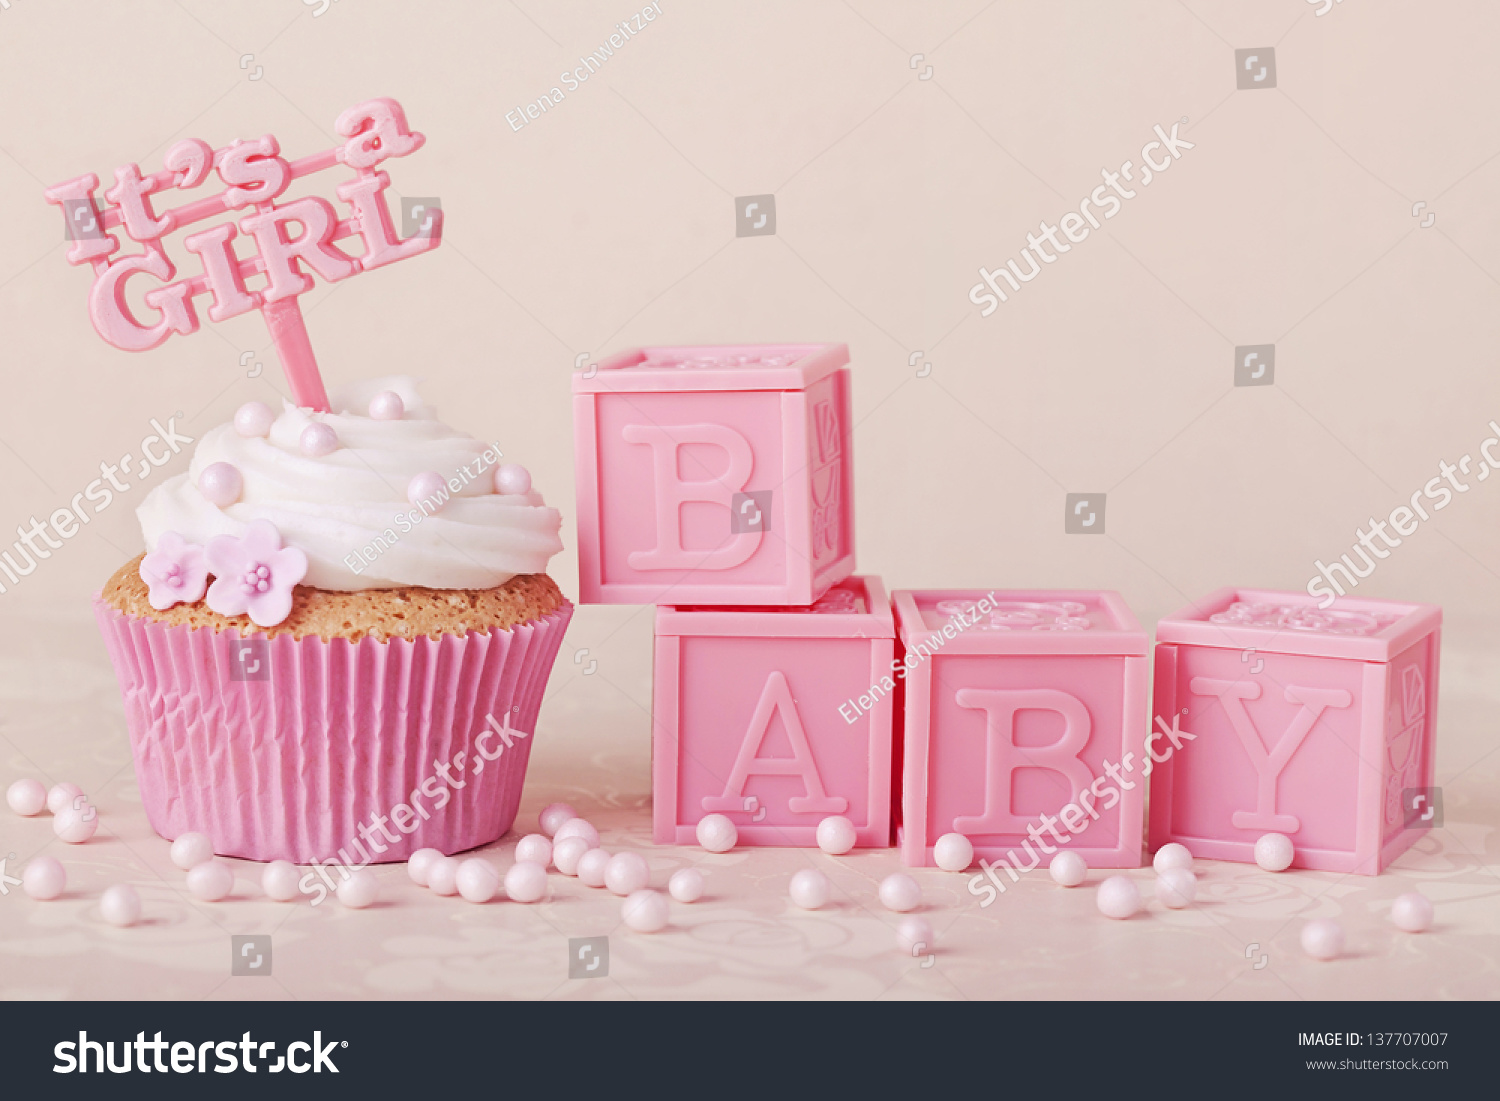 Cupcake with a cake pick and baby cubes #137707007